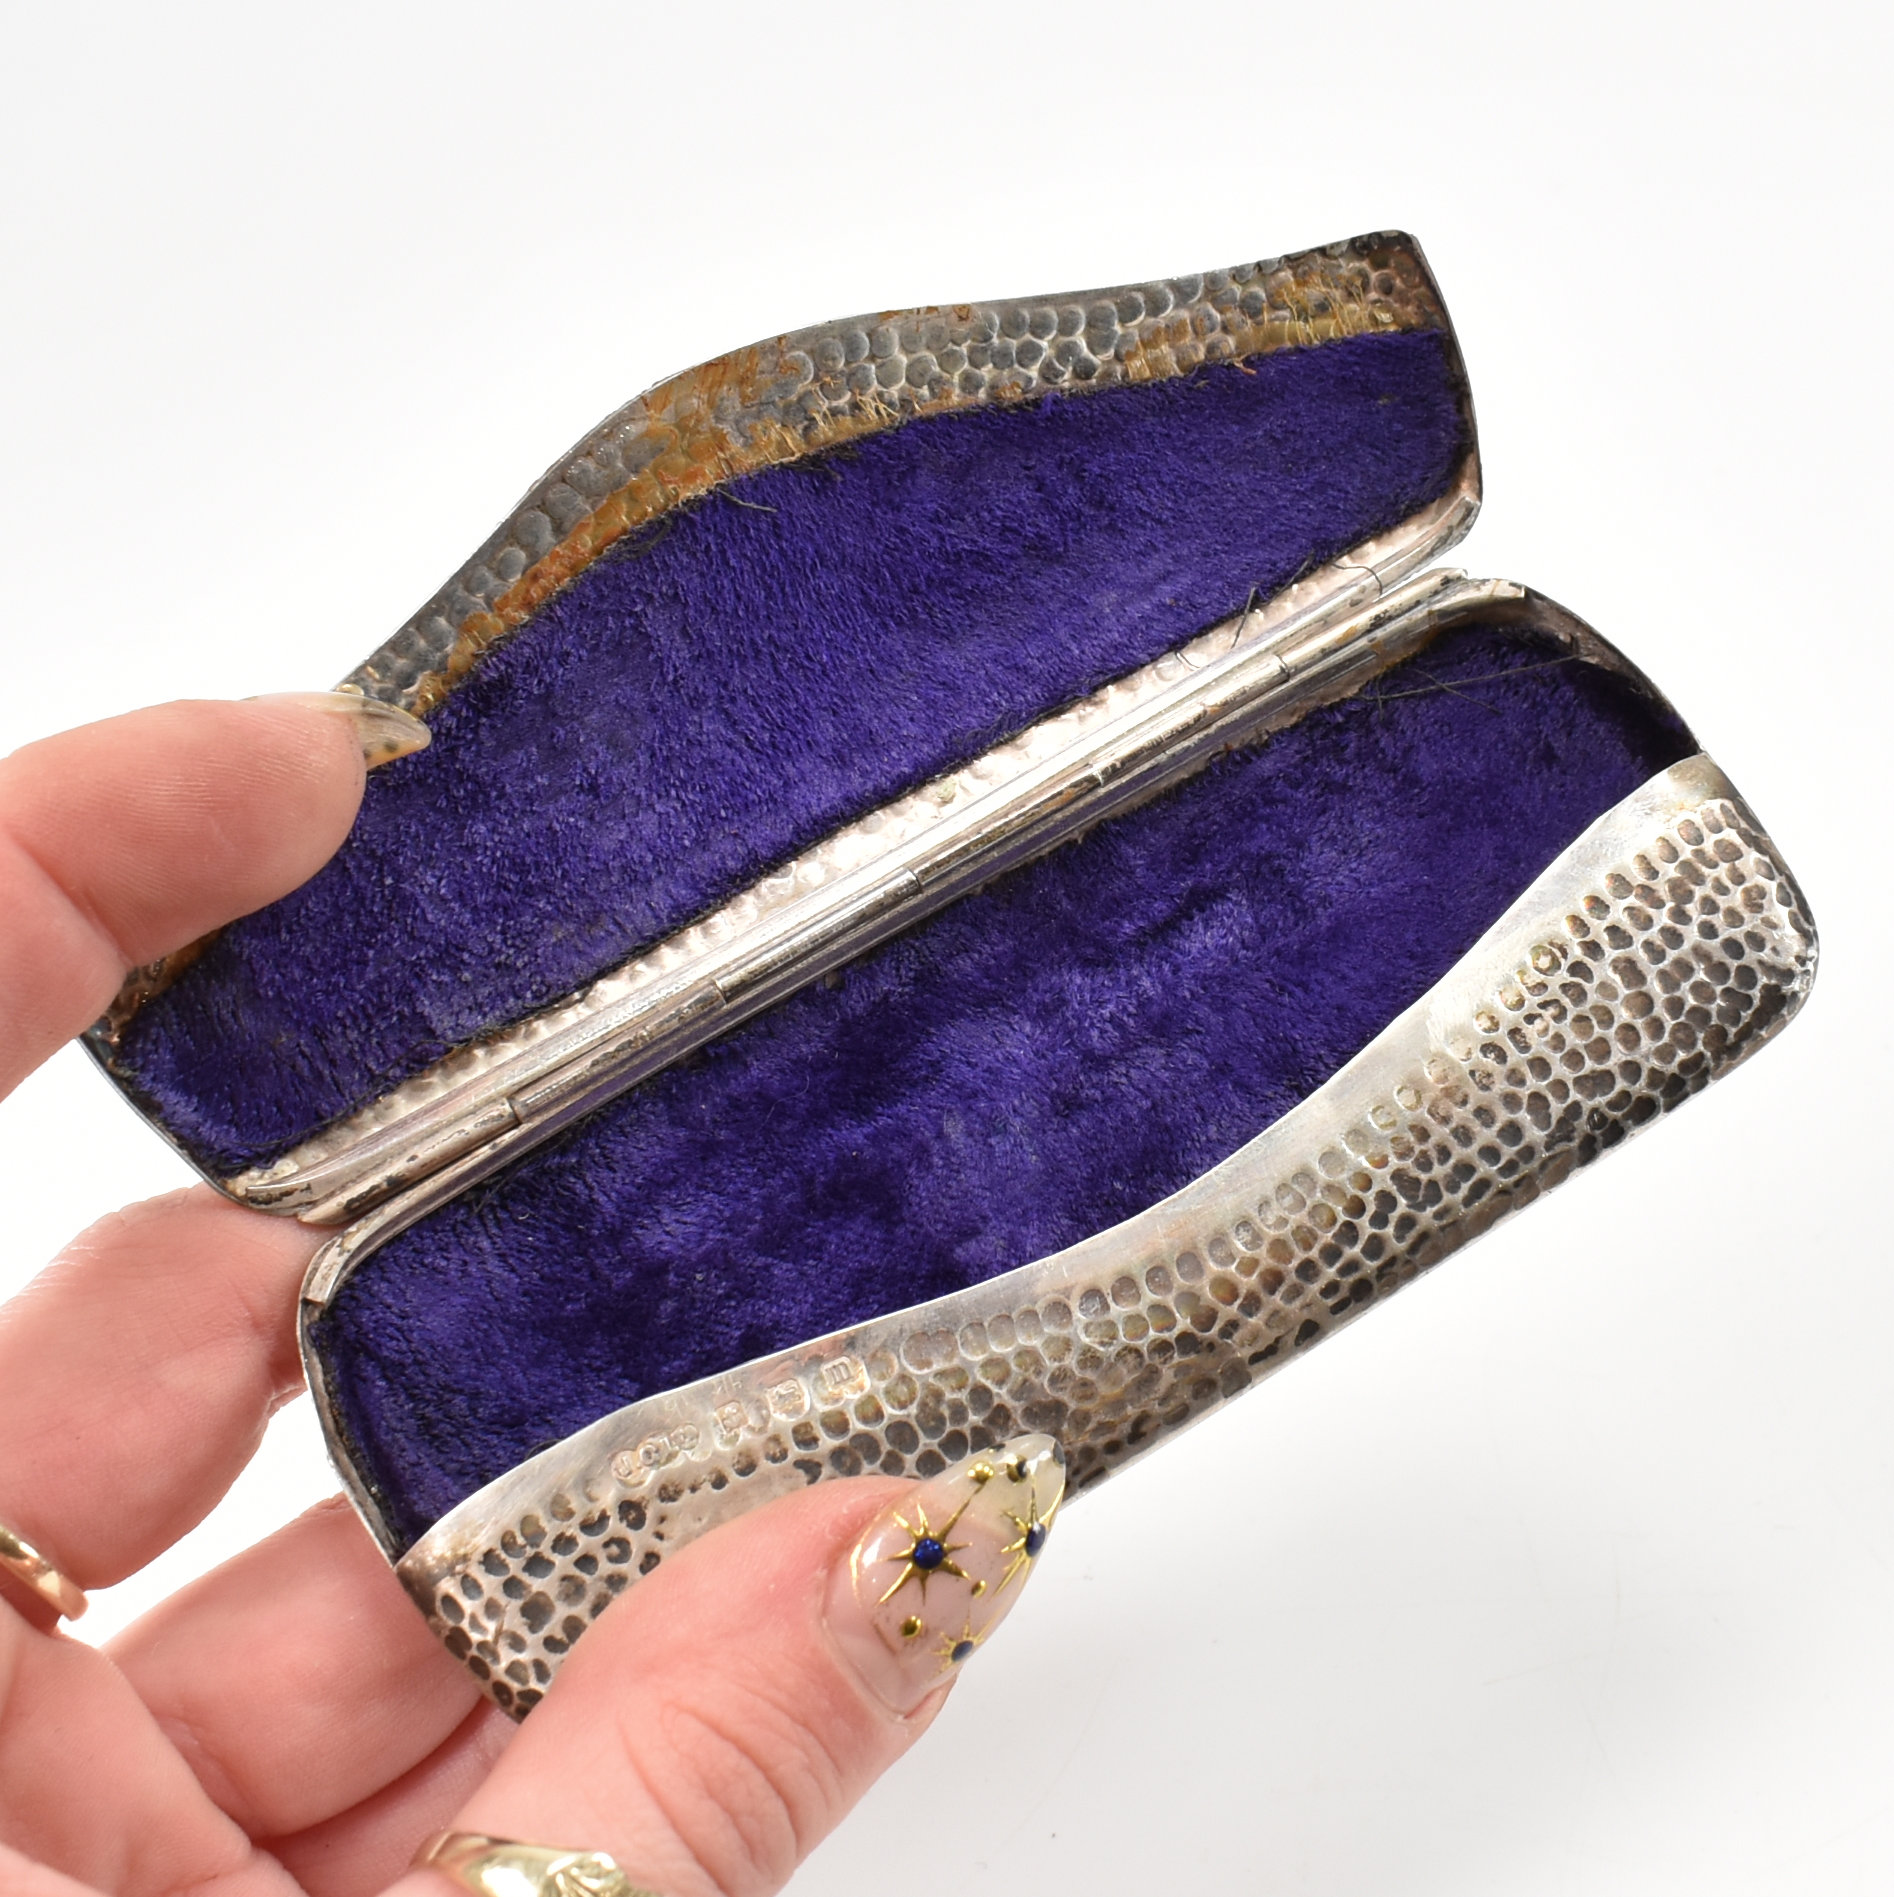 ARTS & CRAFTS SILVER HALLMARKED GLASSES CASE - Image 4 of 5